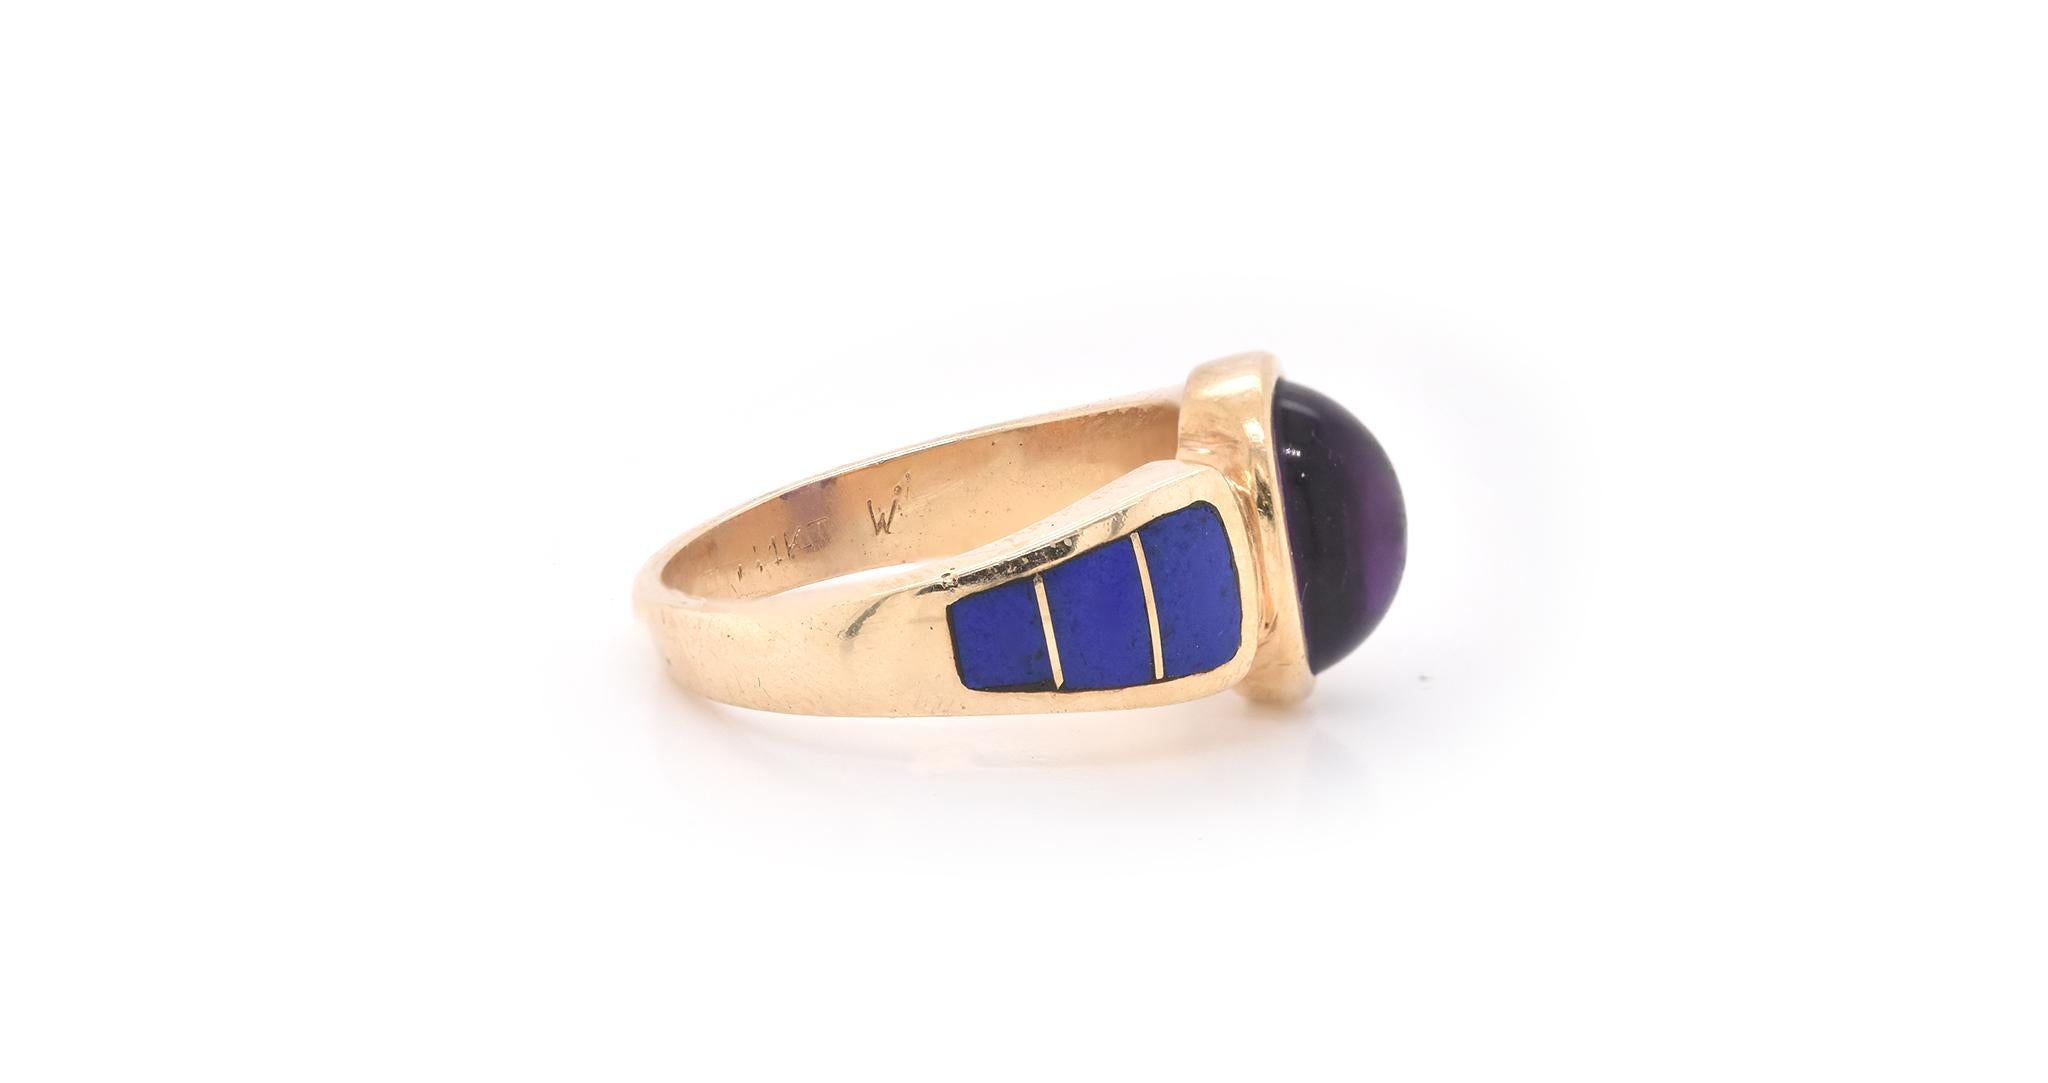 Material: 14k Yellow Gold
Gemstones: Amethyst Cabochon and Lapis
Ring Size: 7 ¾  (allow up to two additional business days for sizing requests)
Weight: 6.71 grams
